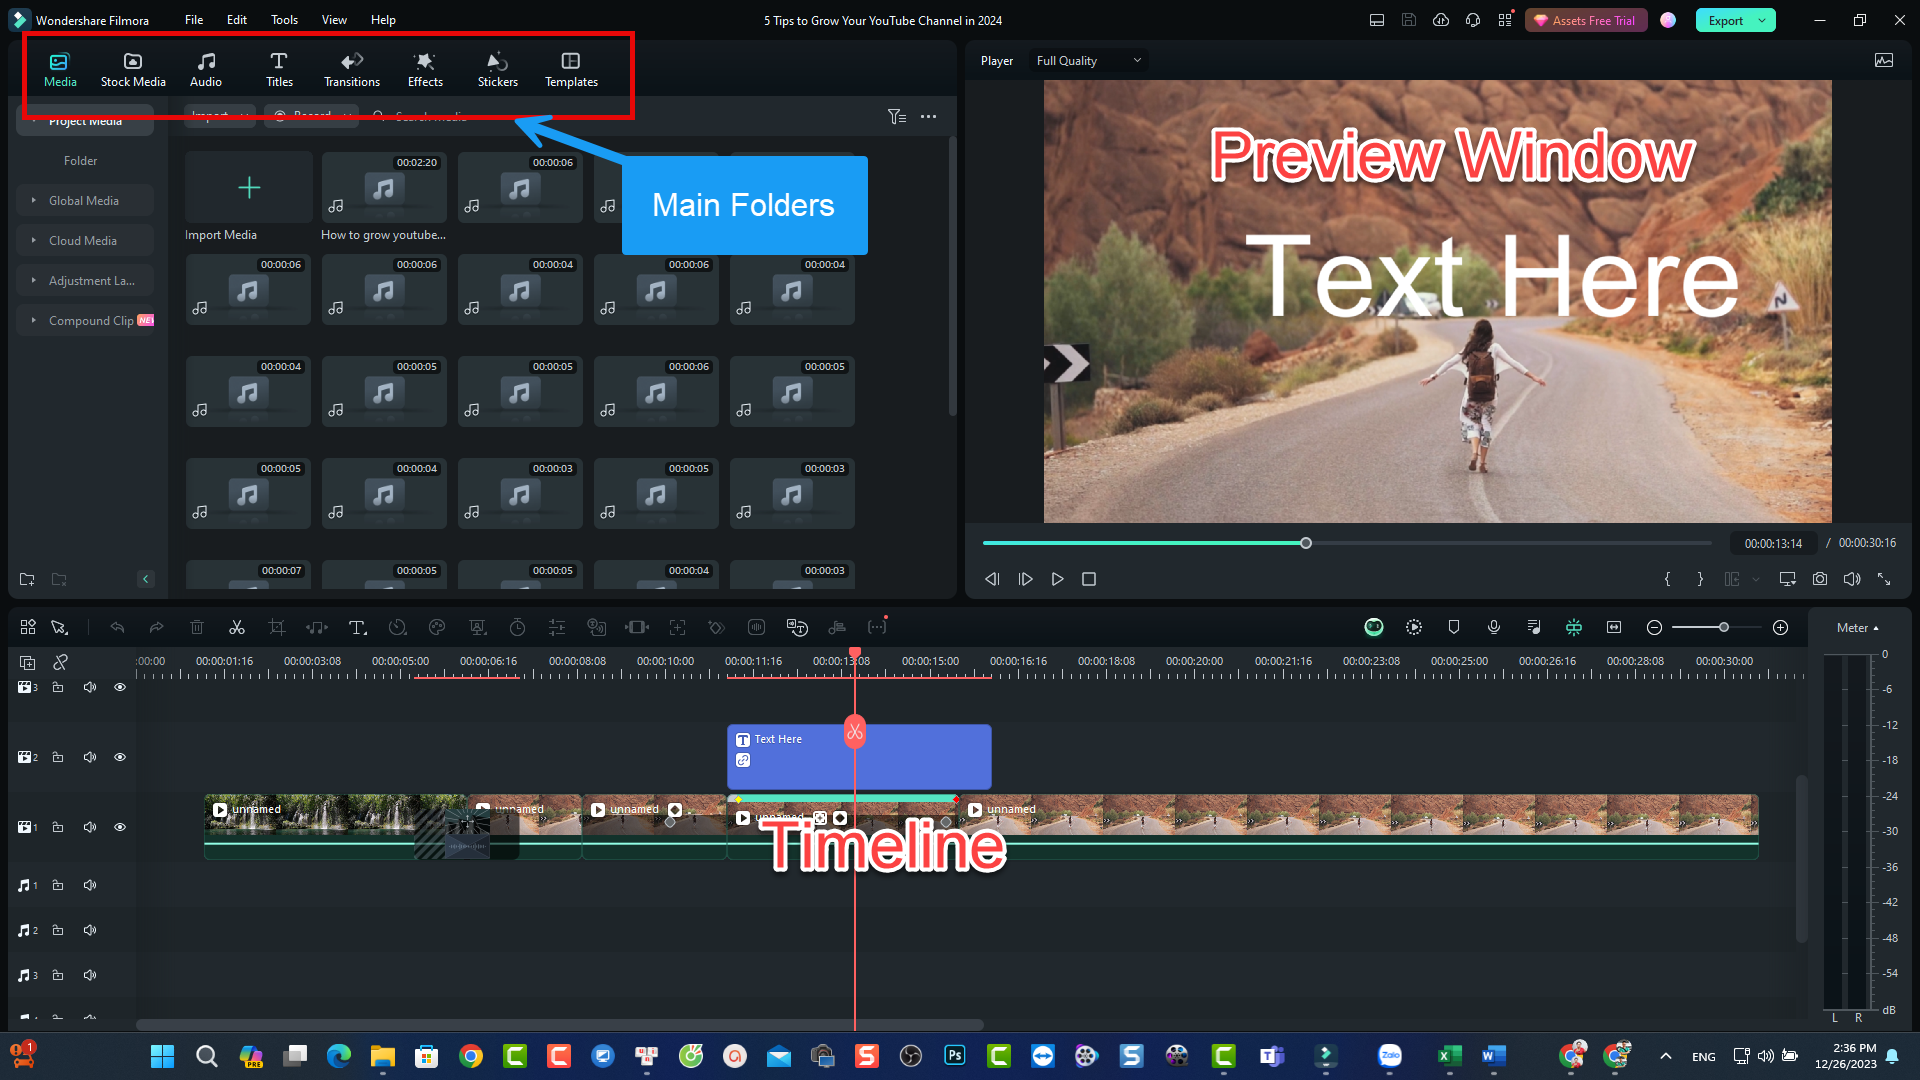 Wondershare Filmora 13 Review: Is it a Good Video Editing Software for Beginners?